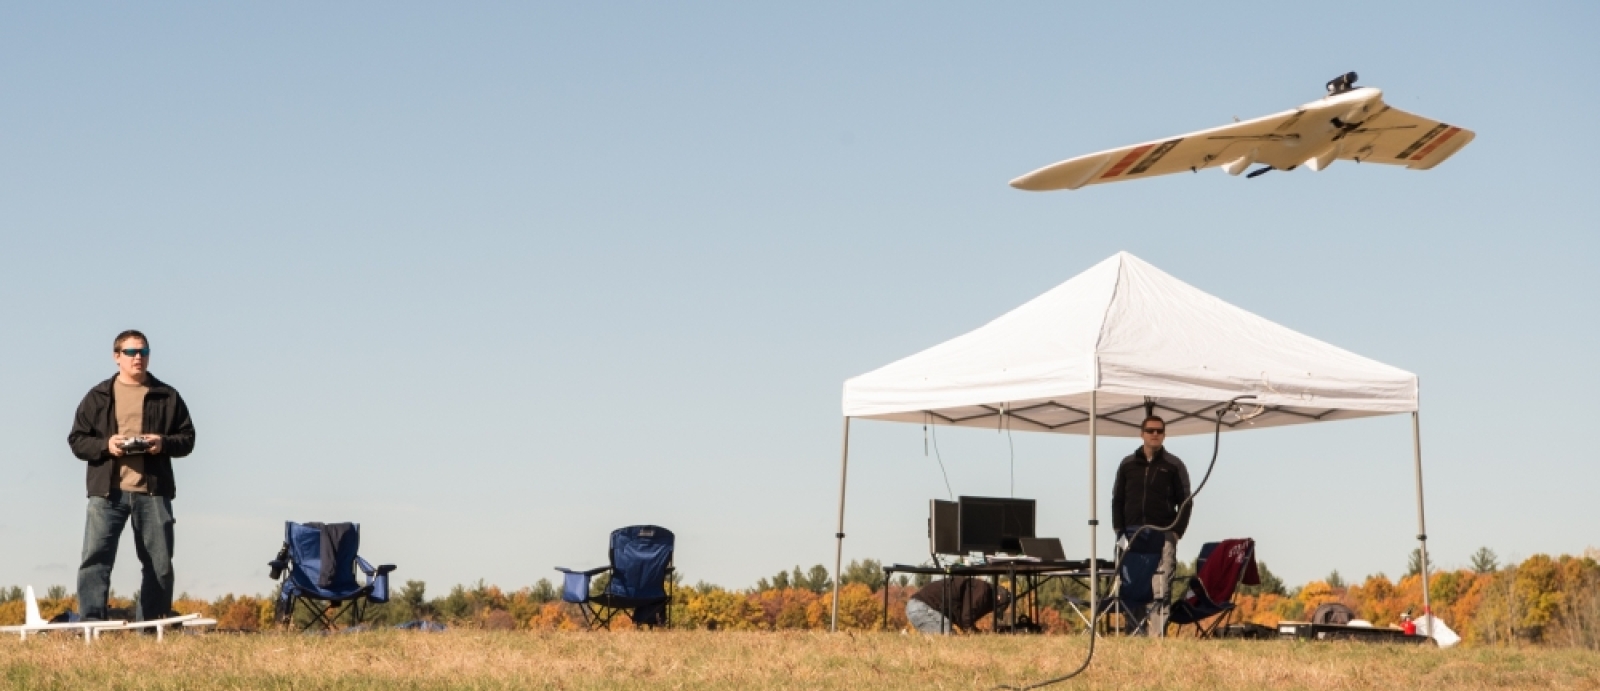 a person flying a small UAV in a field